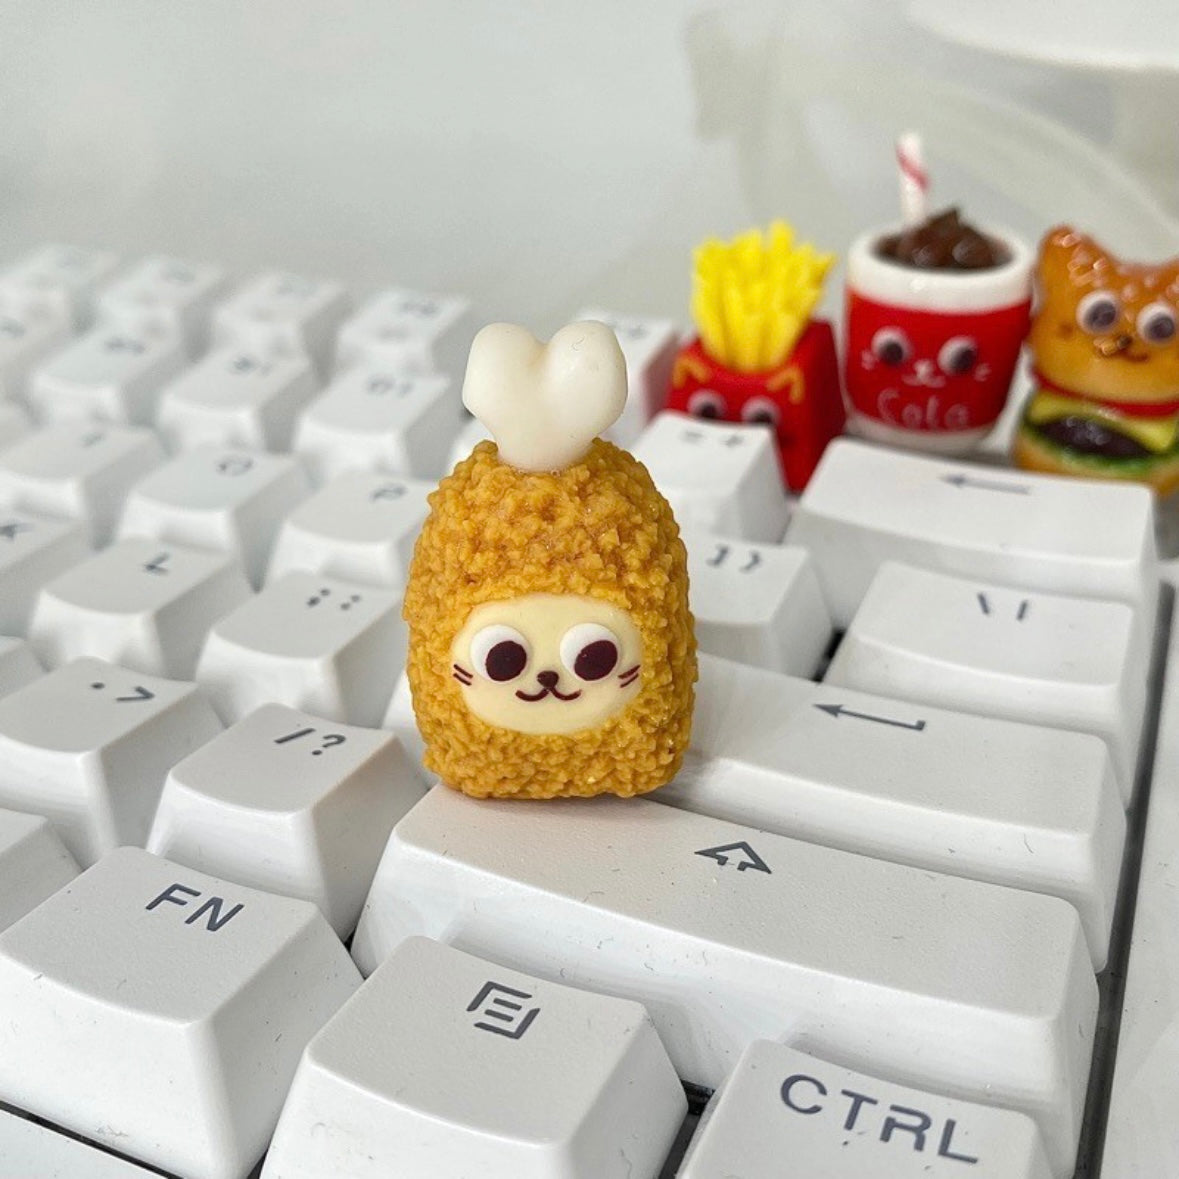 "Indulge in the deliciously whimsical world of our 'Fried Food on the Keyboard' Artisan Keycap. This custom keycap is a playful fusion of keyboard aesthetics and the joy of fried treats. Crafted with precision, it features a delectable assortment of fried foods right on your keyboard. Whether you're a foodie or just want a unique conversation starter, these keycaps add a delightful touch to your setup." 🍟🍔🍗🍕💻 #KeyboardAccessories #ArtisanKeycaps #FoodieFun